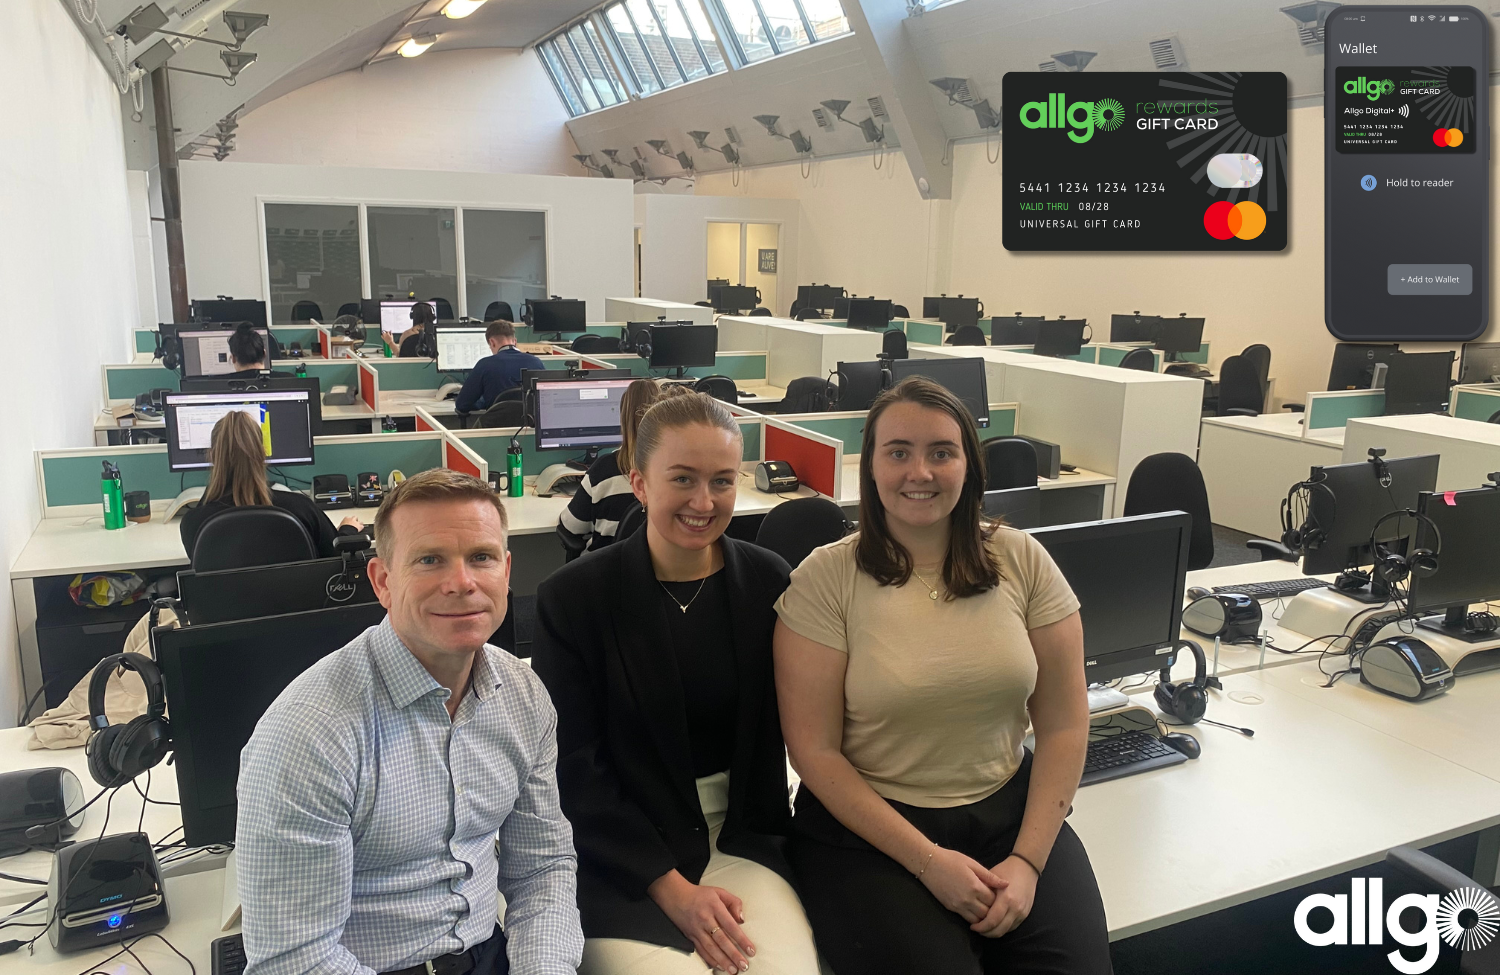 Allgo moved into newly refurbished offices in the Digital Hub in October, doubling its capacity. And the Allgo Rewards team has recruited and trained over 20 new staff for the busy period.